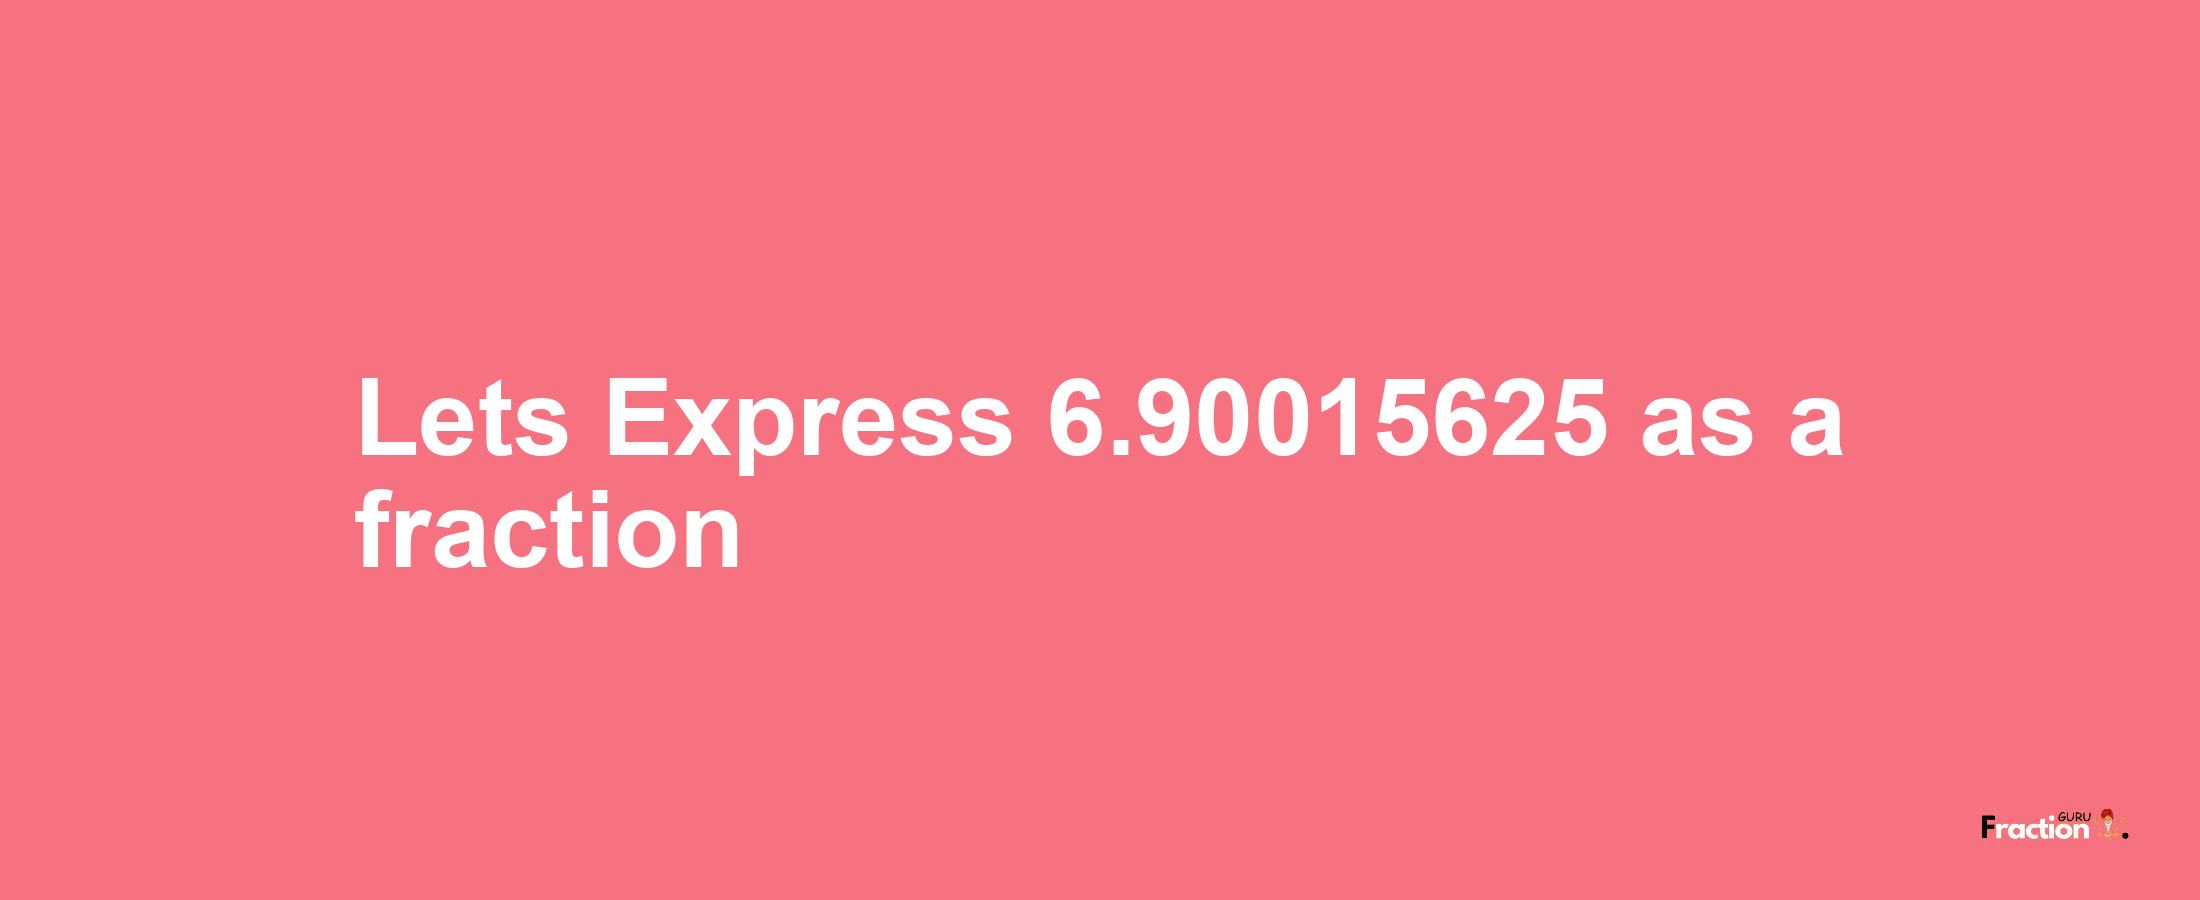 Lets Express 6.90015625 as afraction